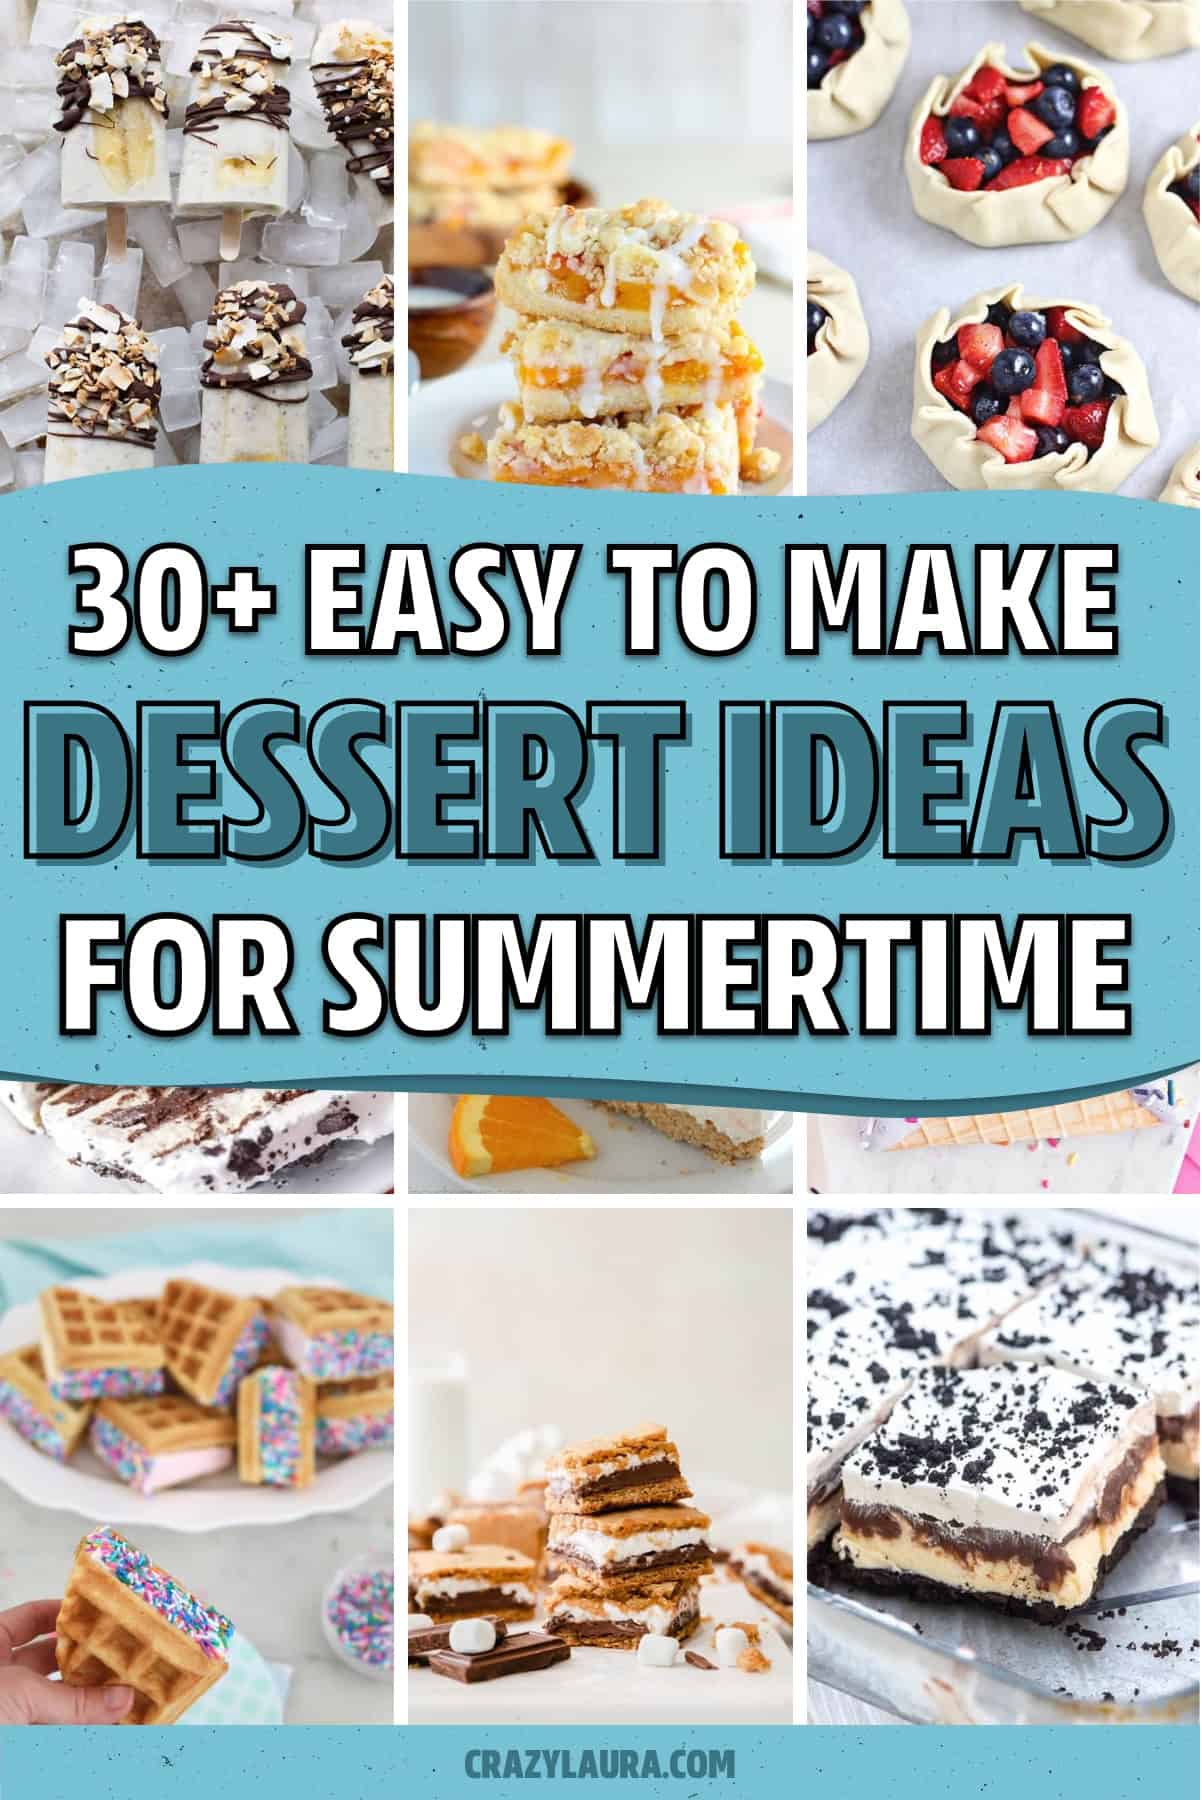 sweet treat recipes for summer days